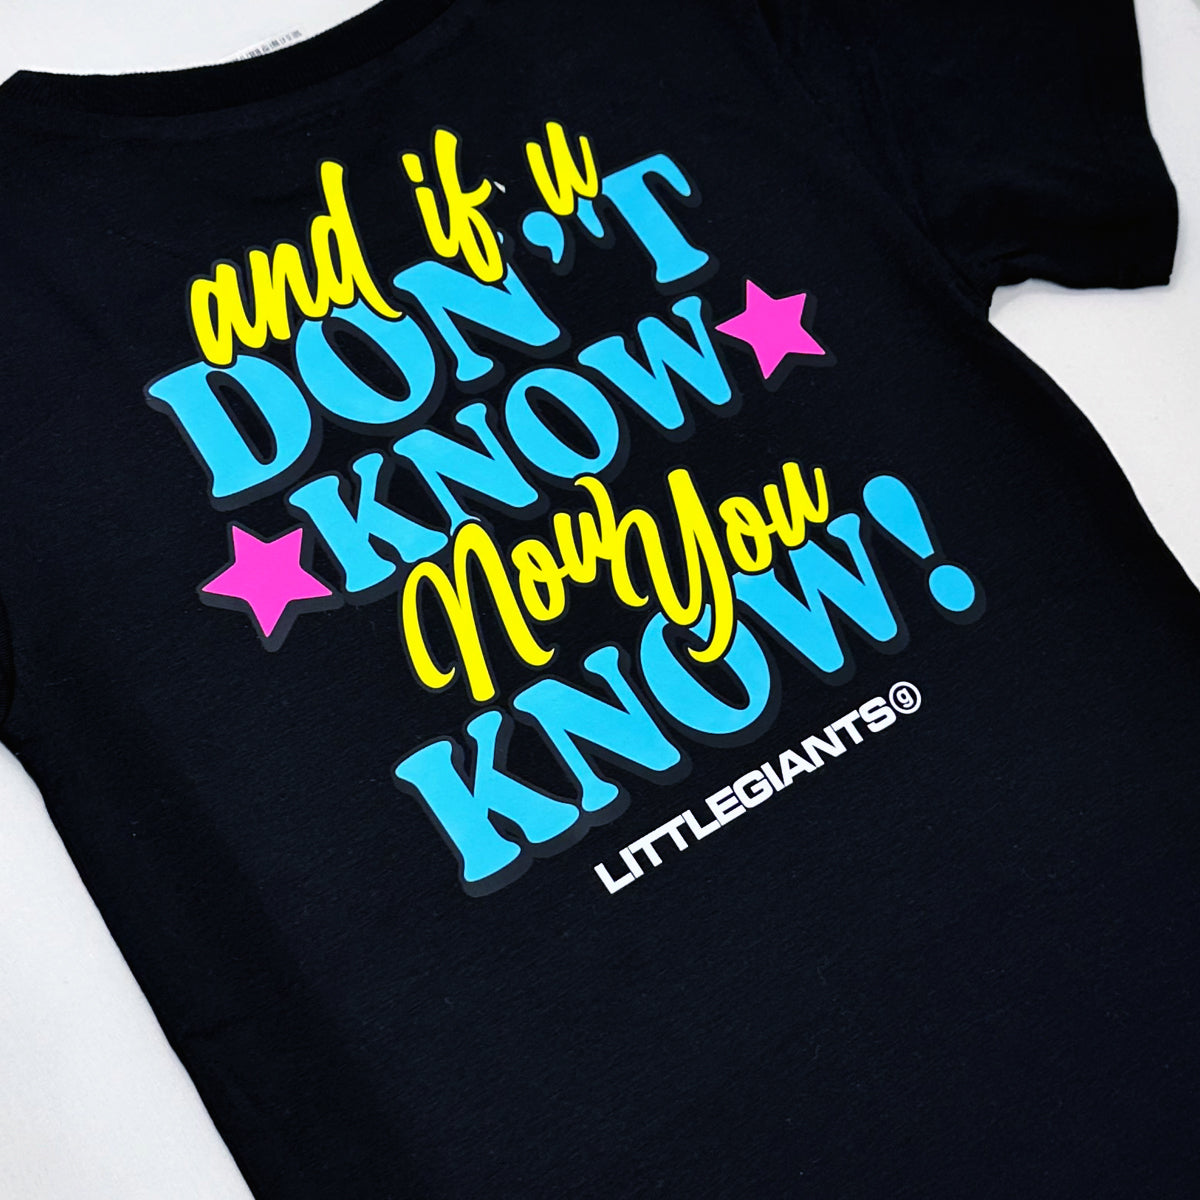 And If You Don't Know...T-Shirt (Black)